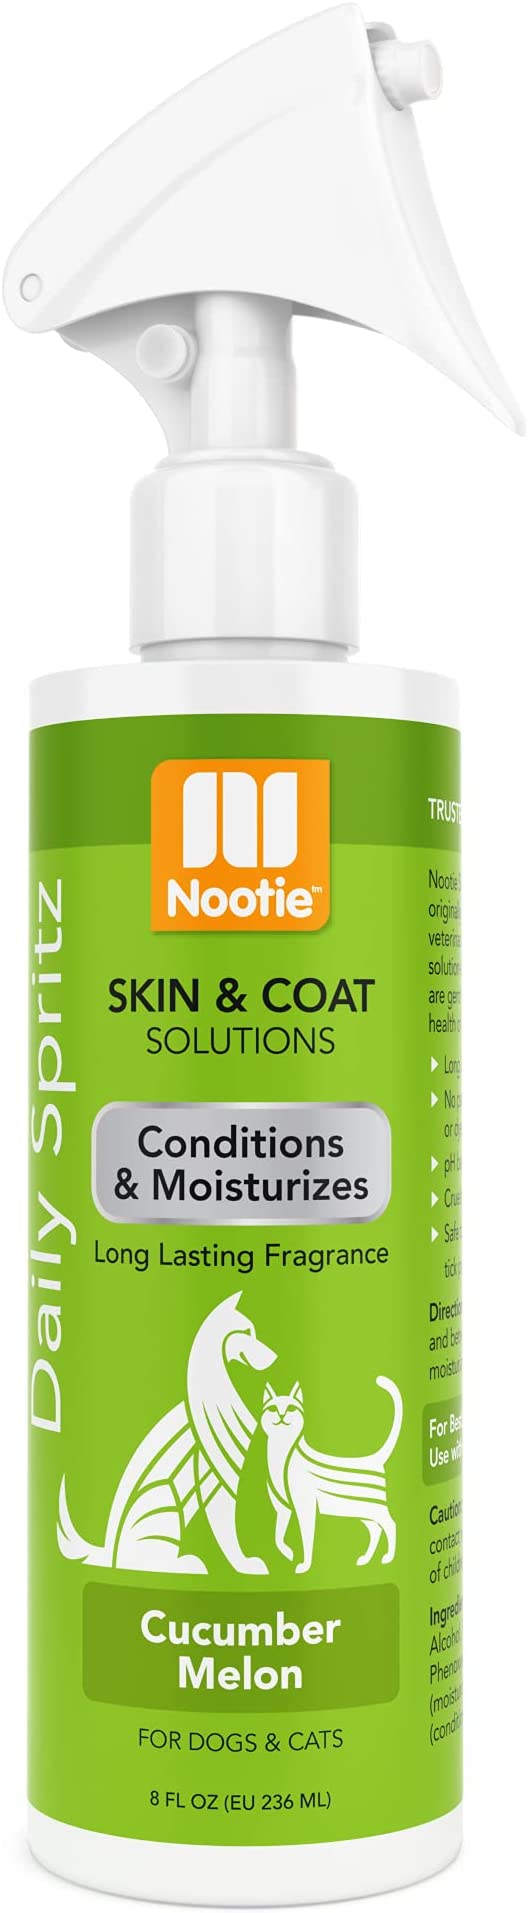 Nootie Daily Spritz Pet Conditioning Spray - Dog Conditioner for Sensitive Skin - Long Lasting Fragrance - No Parabens, Sulfates, Harsh Chemicals or Dyes - Revitalizes Dry Skin & Coat - Various Scents